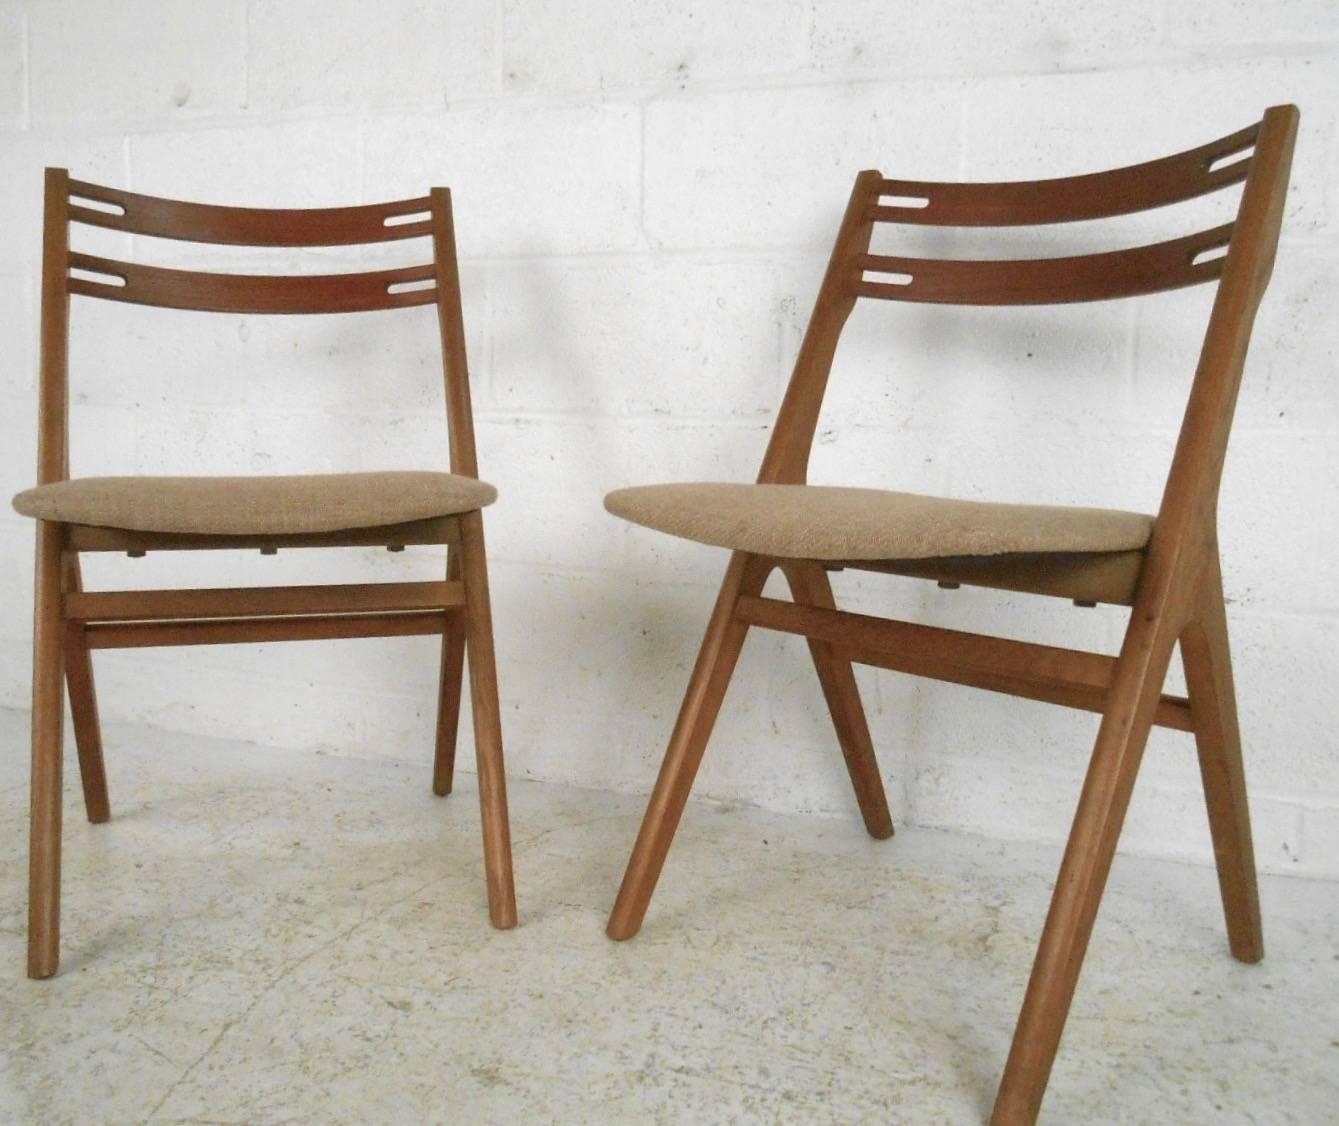 This matching pair of vintage modern dining chairs feature uniquely shaped seat backs, vintage upholstery, and sturdy, stylish construction. Perfect addition to any dining room or for occasional seating in any setting. Please confirm item location